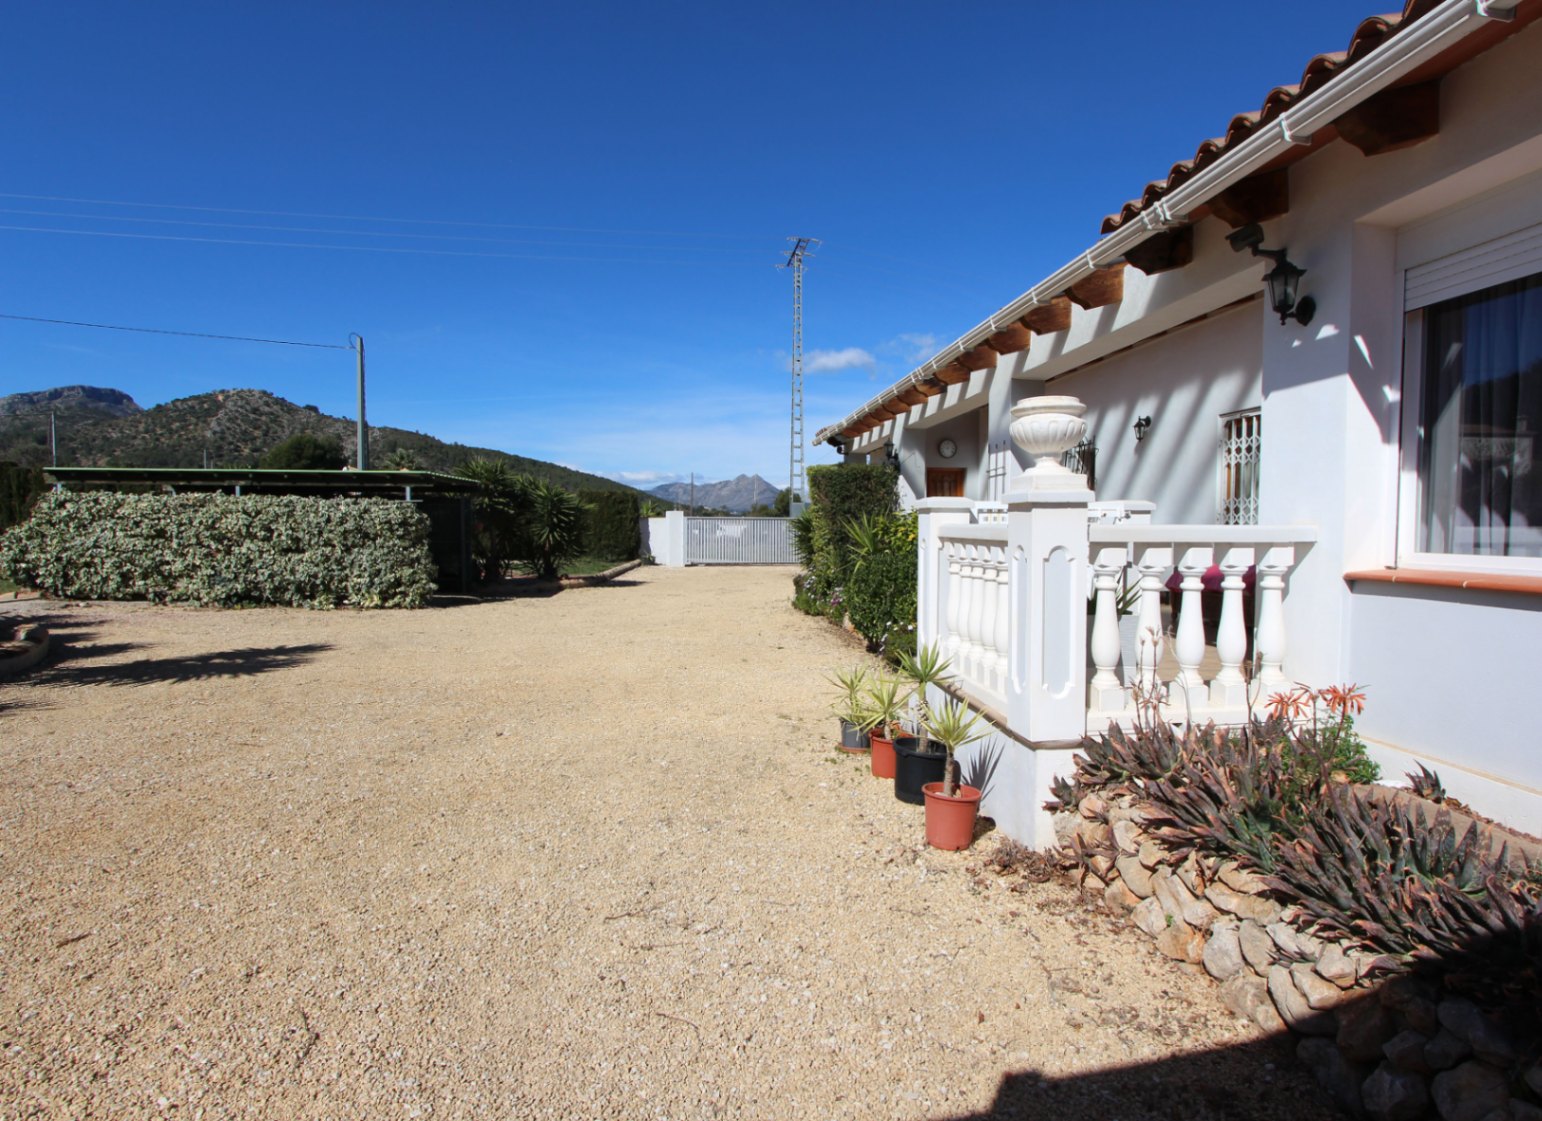 Detached finca, on a flat plot, located just on the outskirts of Jalon